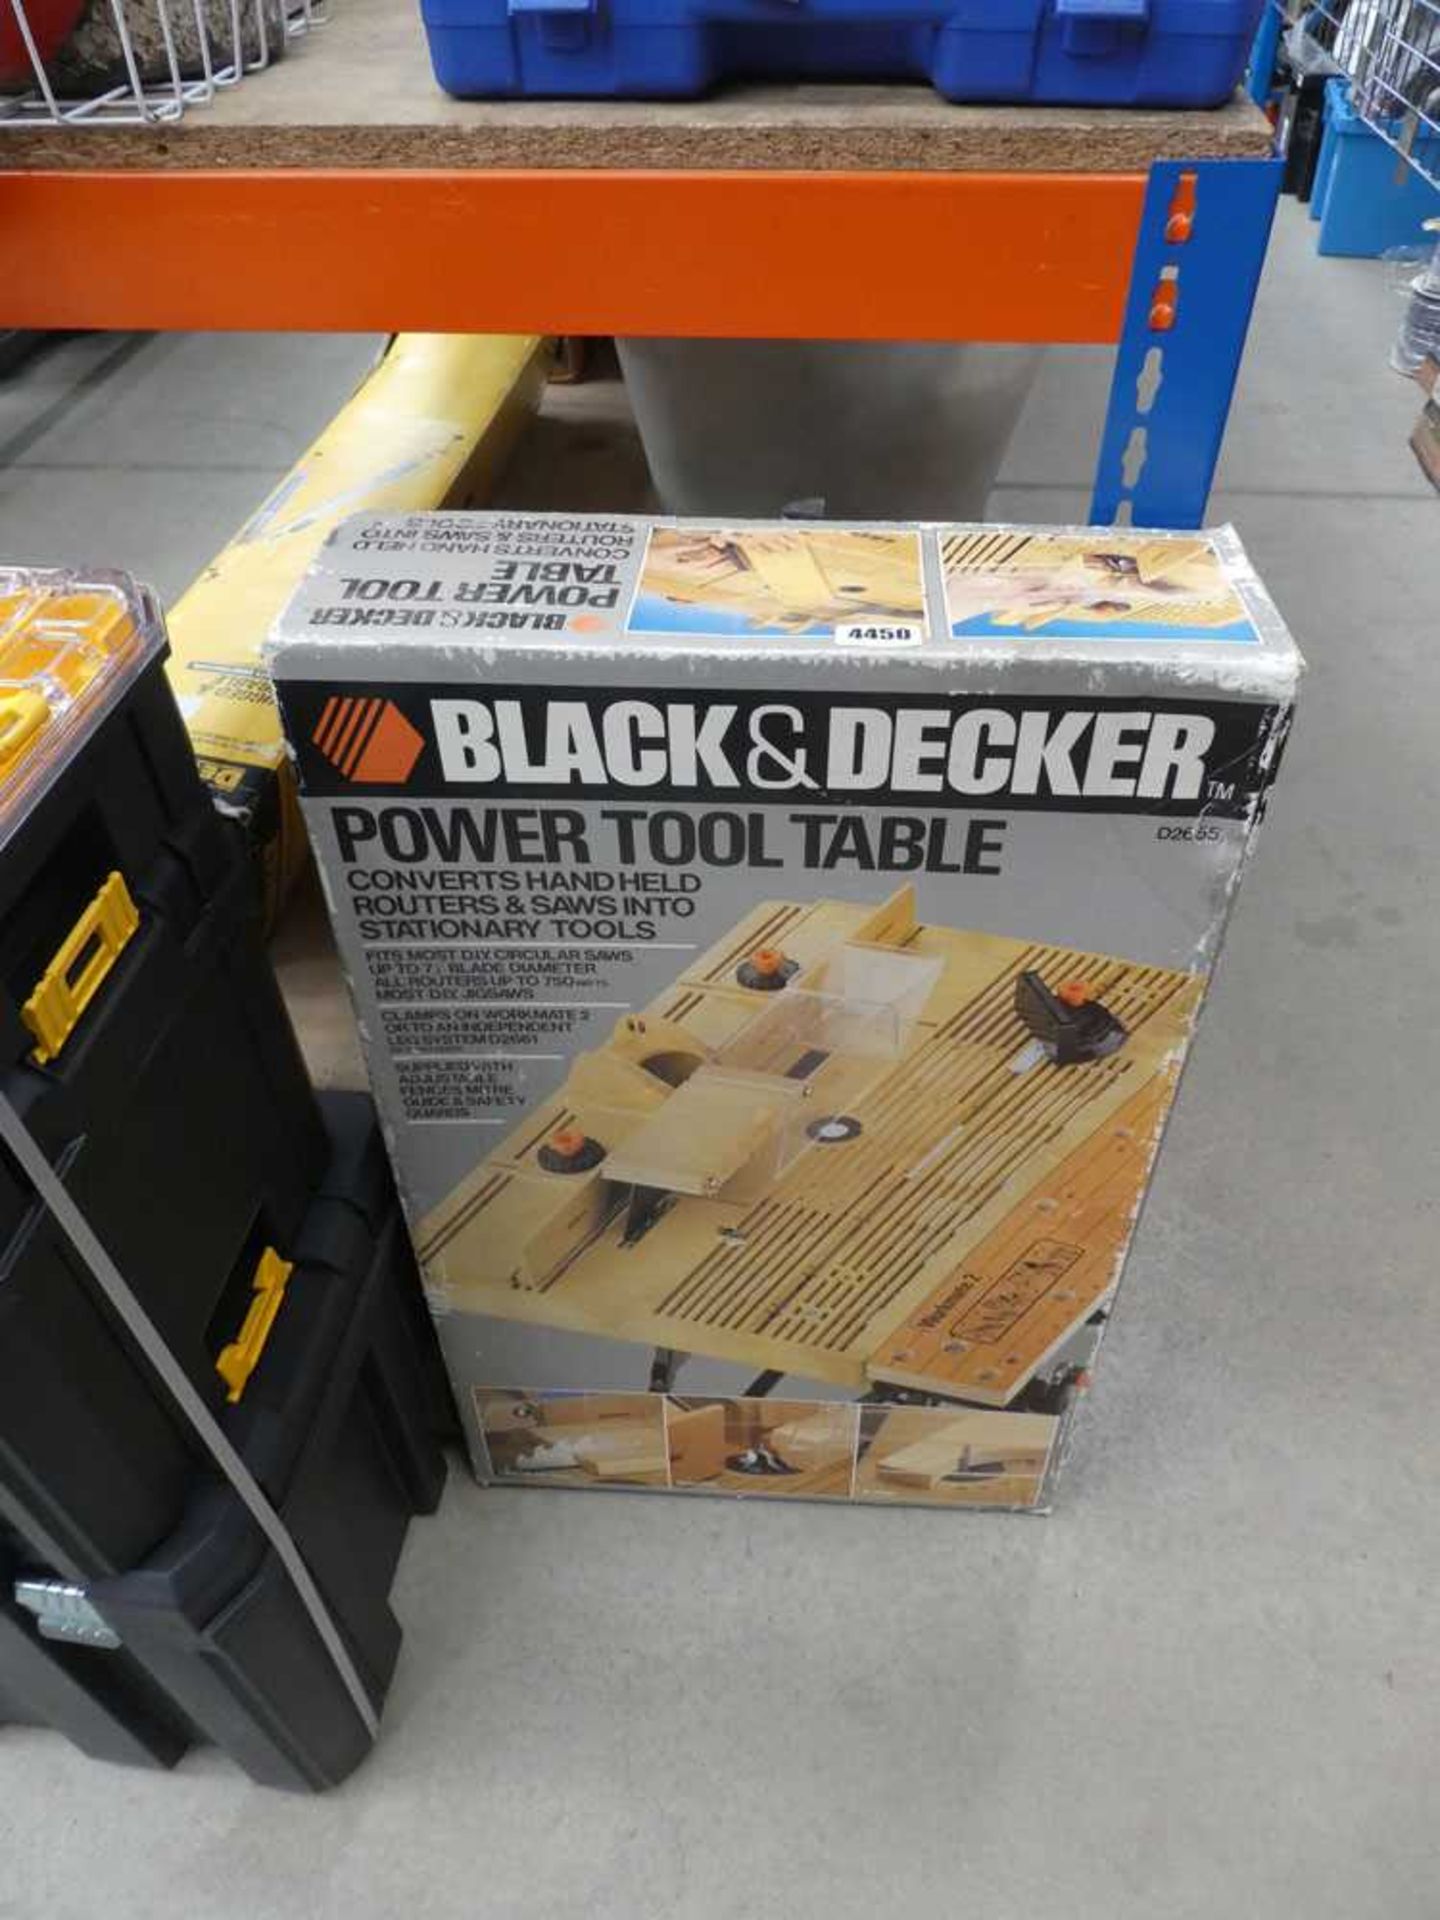 Black and Decker power tool table